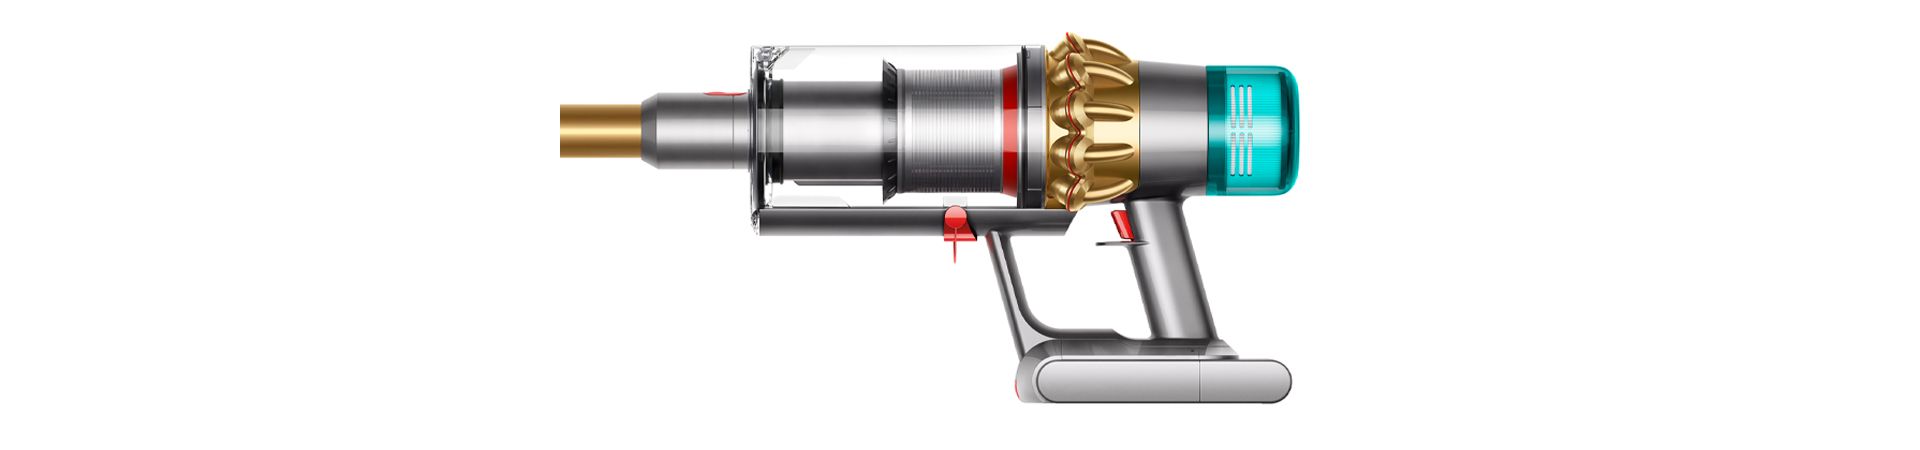 The Dyson V15 Detect vacuum, exclusively in gold